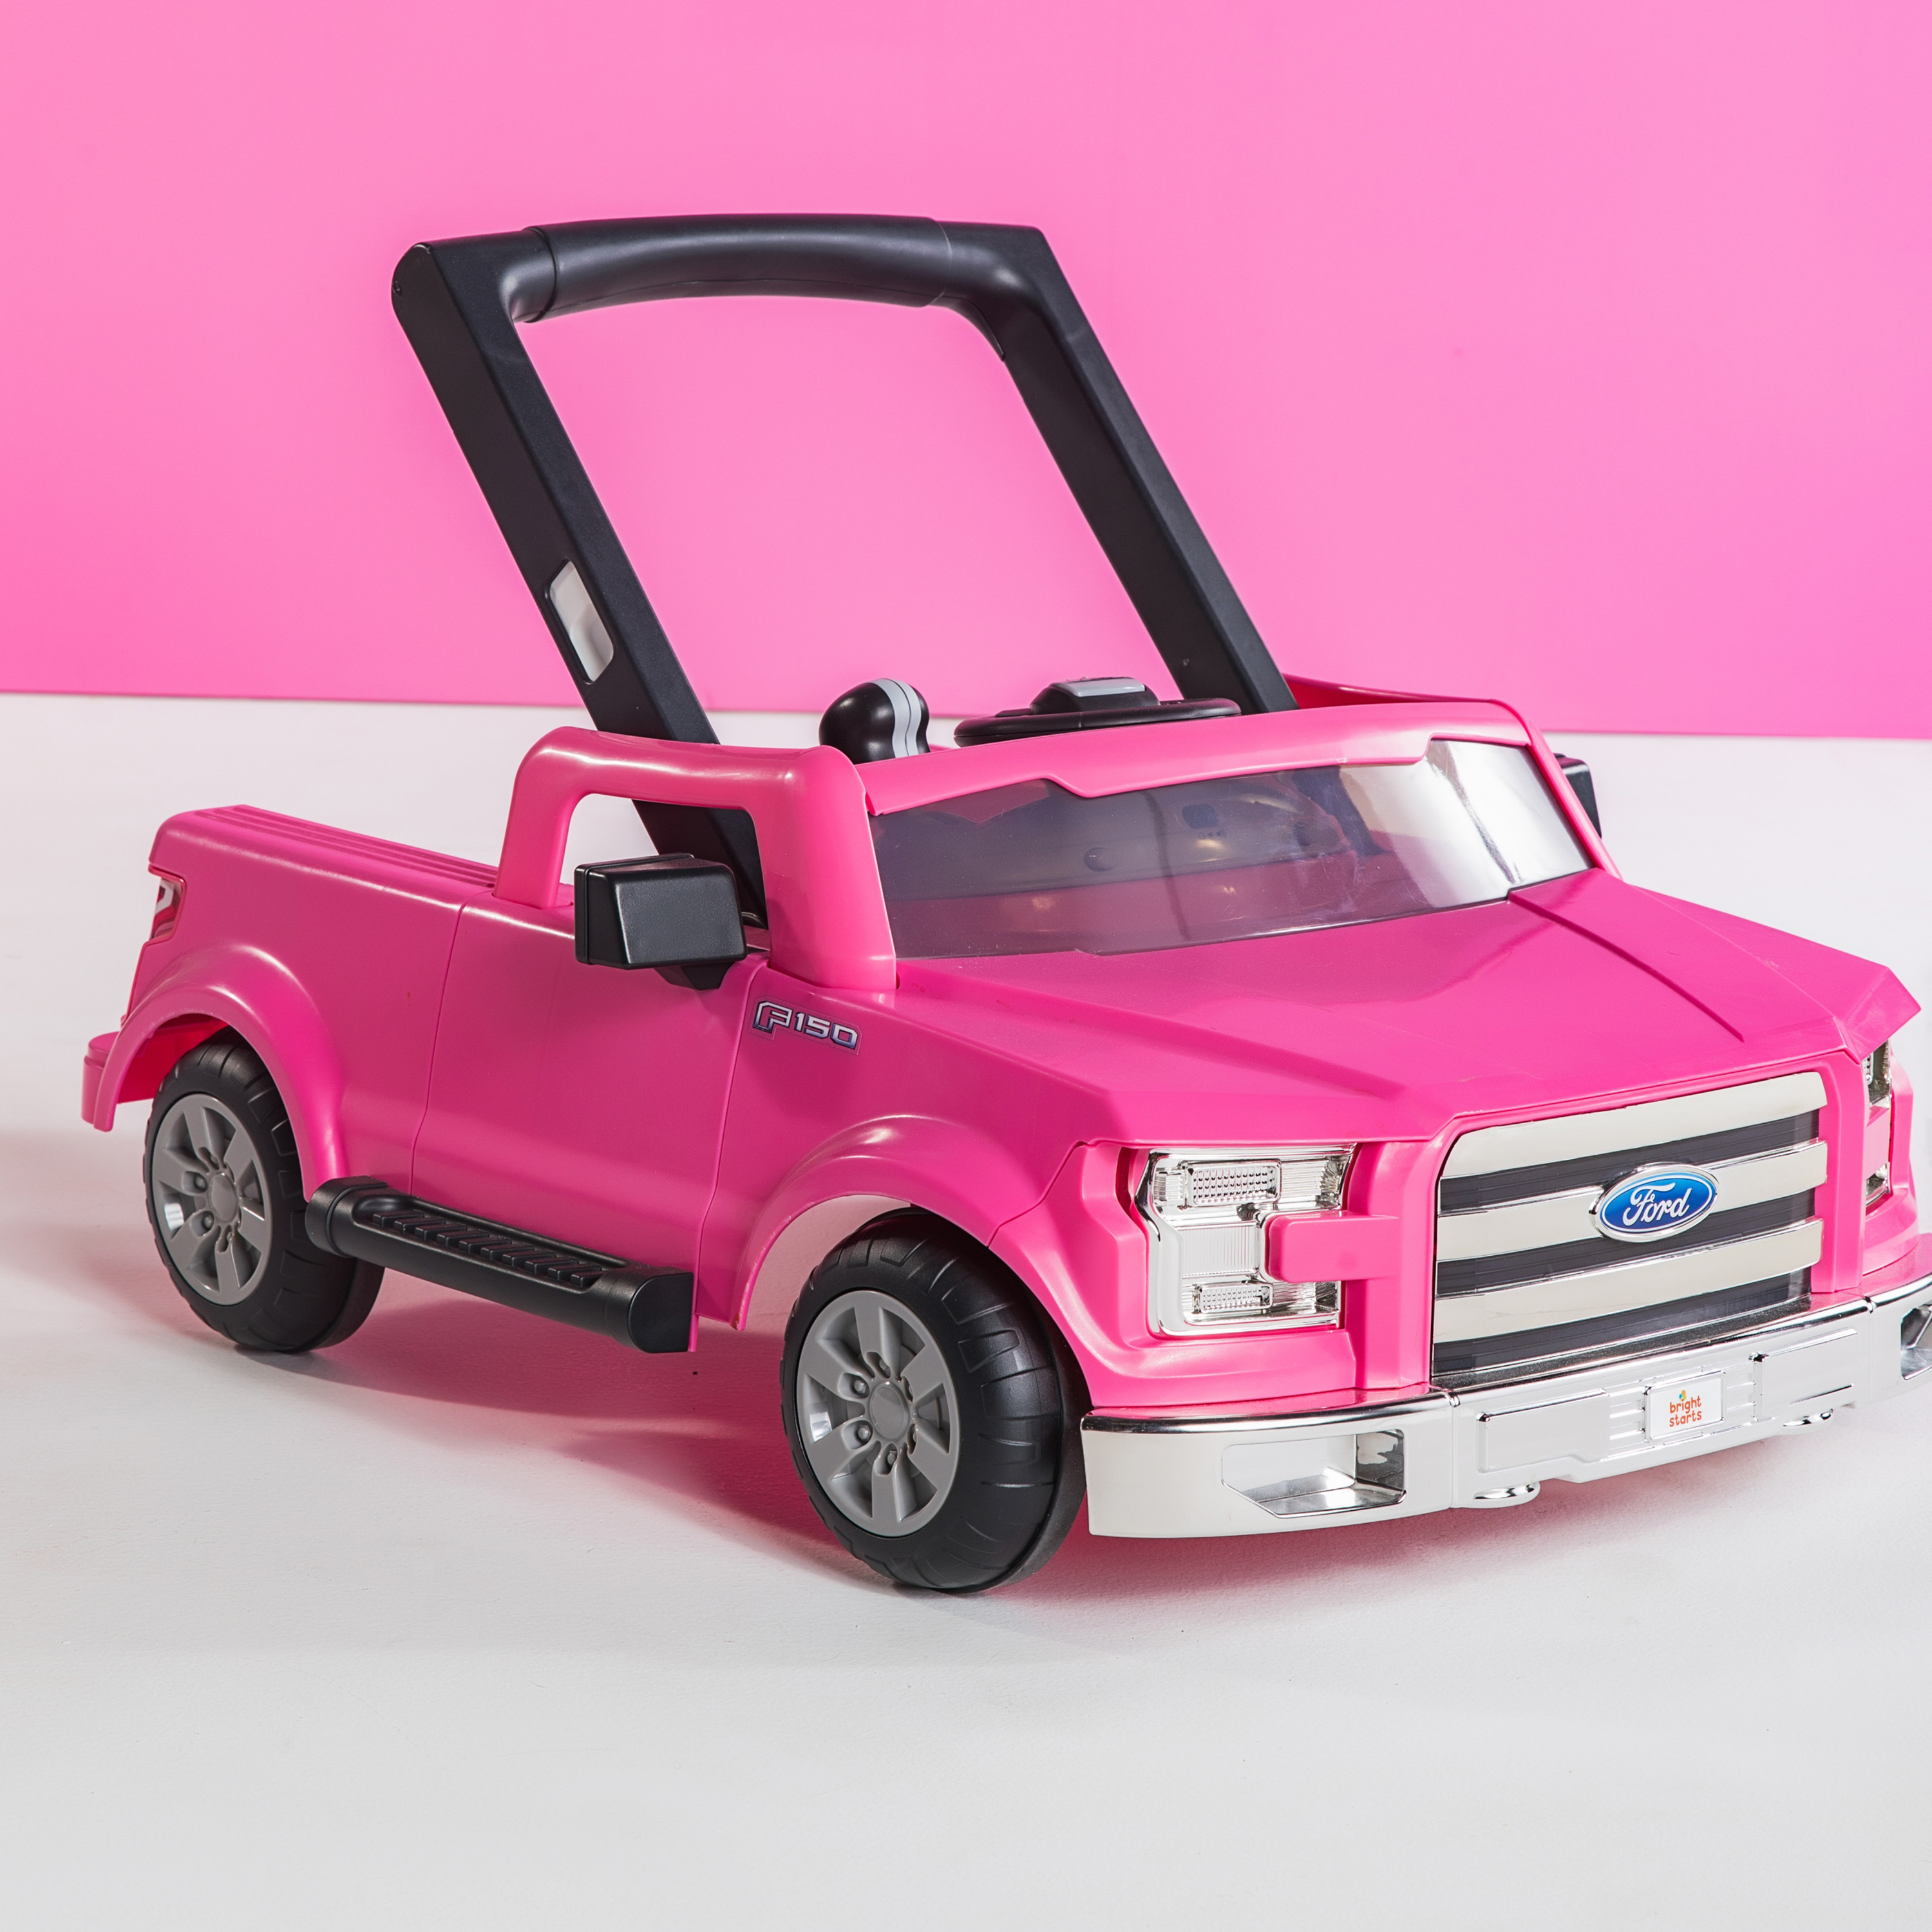 Bright Starts 3 Ways to Play Ford F-150 Baby Walker with Activity Station, Pink - image 4 of 20